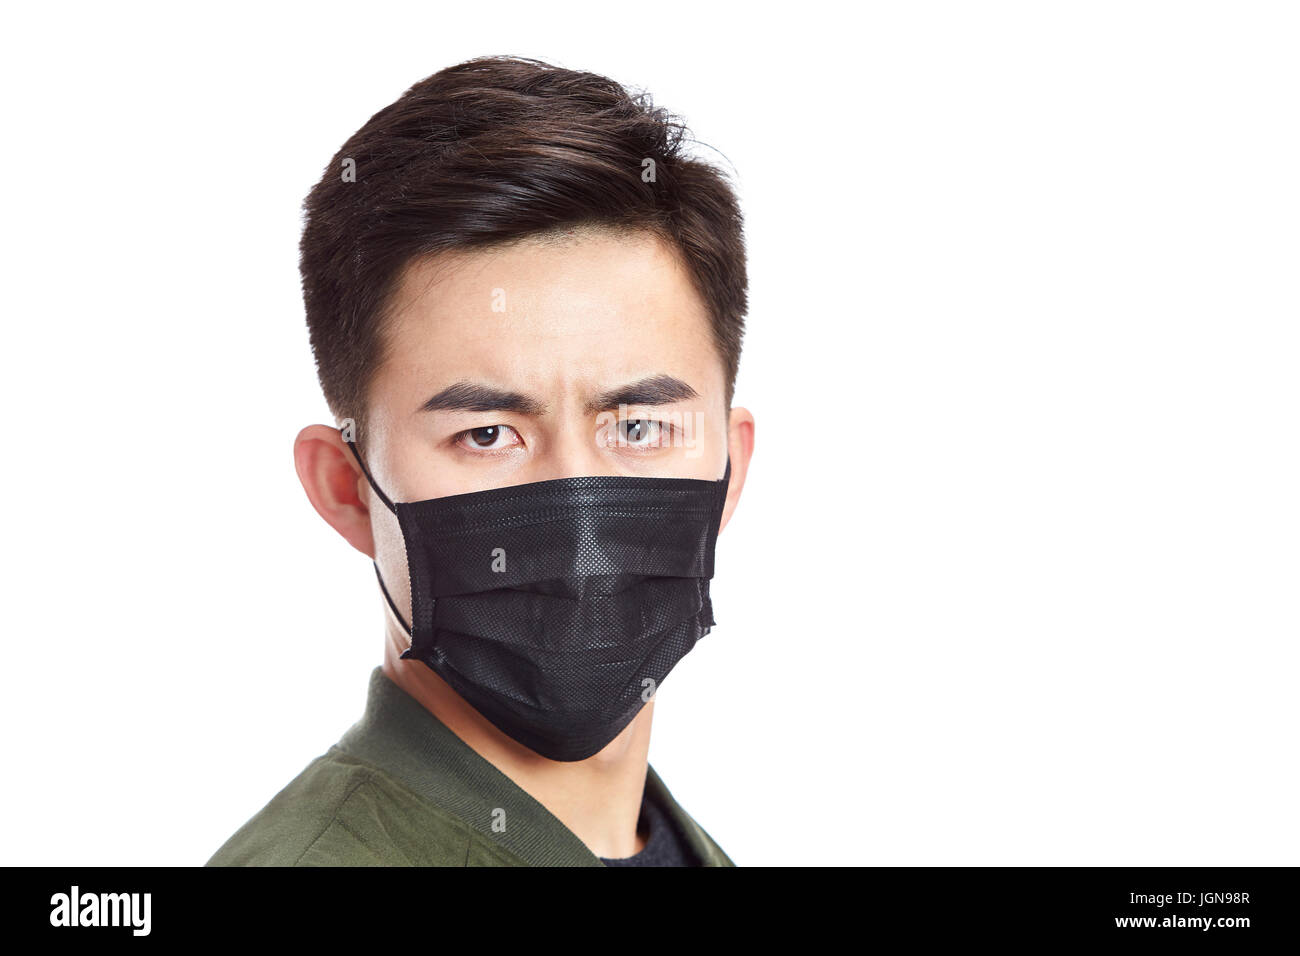 young asian man wearing black mask staring at camera, isolated on white background. Stock Photo